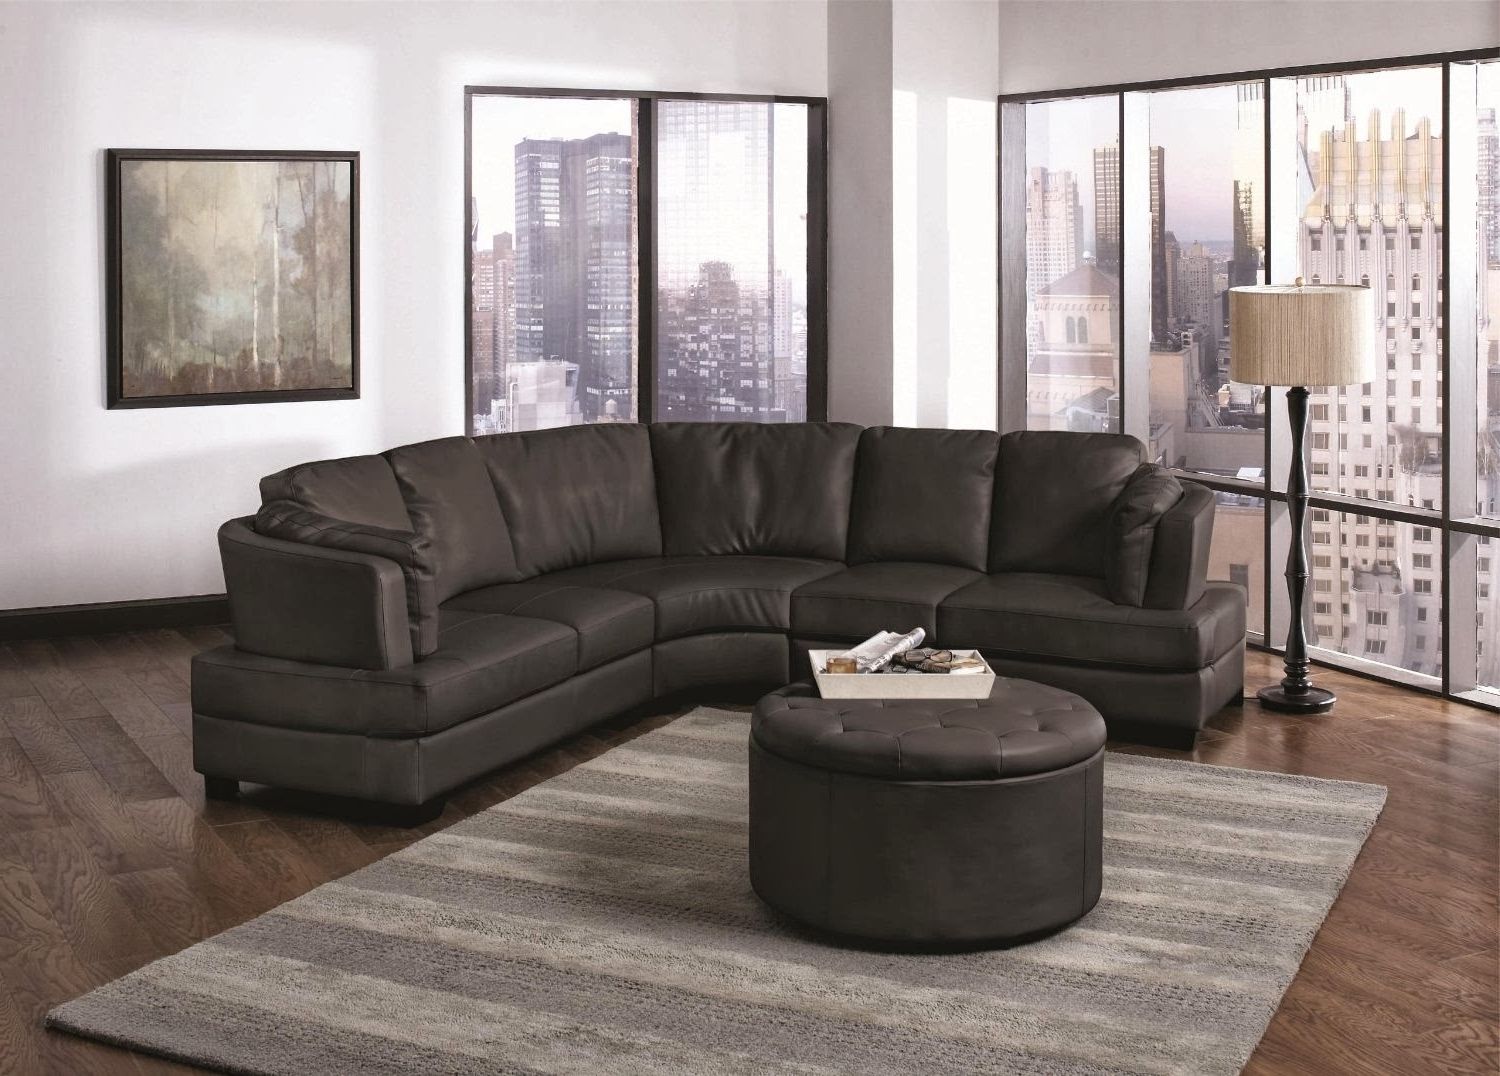 Furniture : Sectional Couch Nanaimo Sectional Sofa Bed With Regarding Famous Nanaimo Sectional Sofas (View 1 of 15)